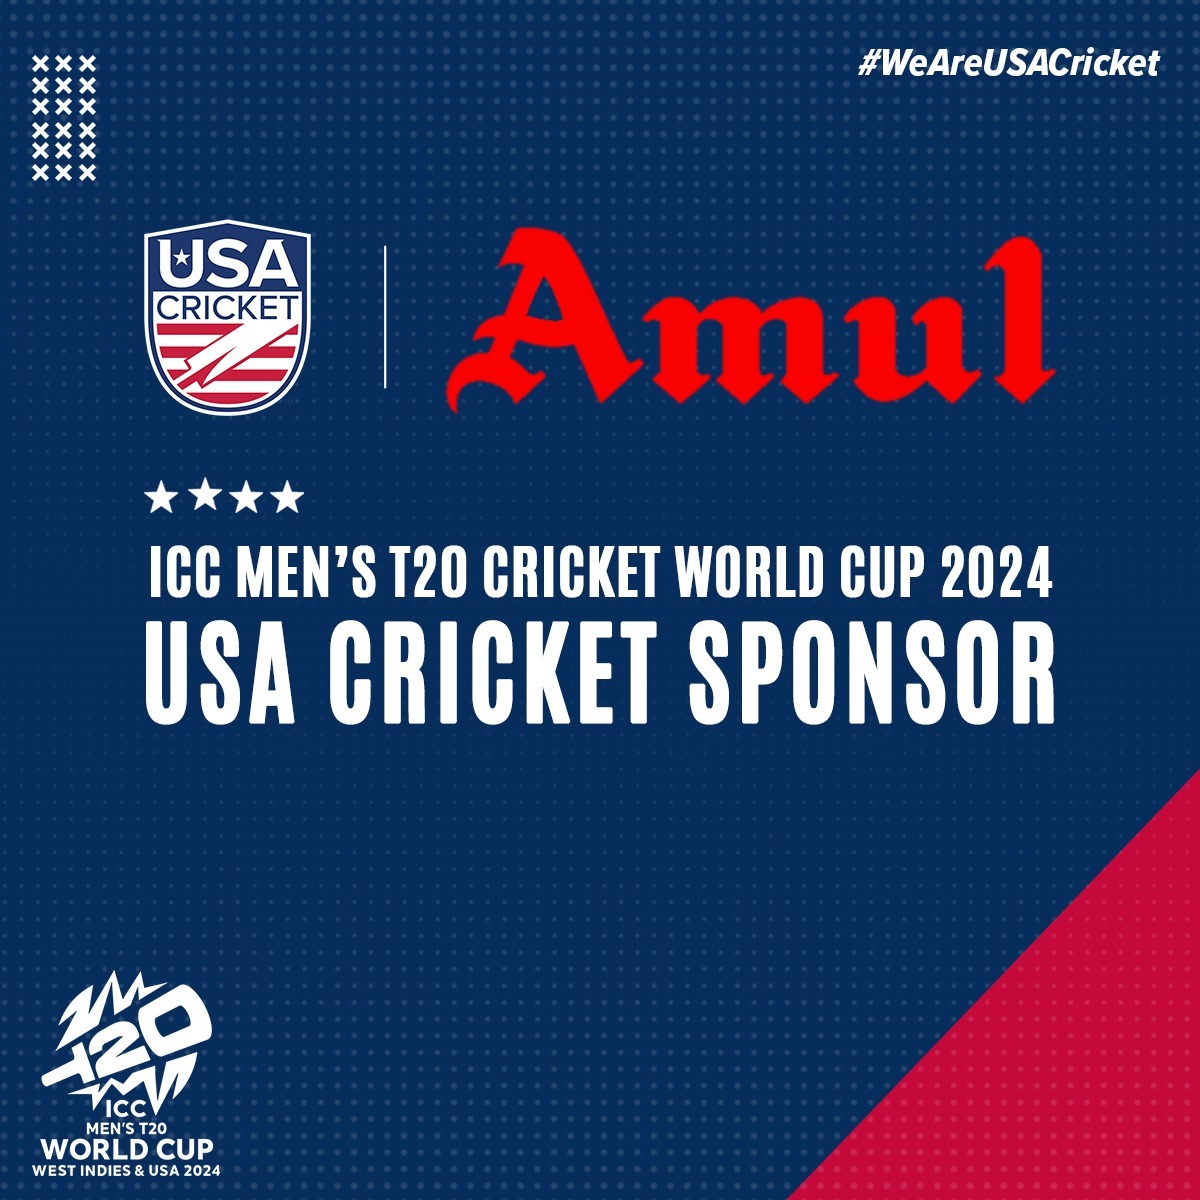 #Amul, the big cheese in the dairy world, is now the top sponsor for the USA Men’s Cricket Team at the T20 World Cup! Amul has a history of backing international teams in ICC events. With their support and our recent series win vs. Canada, our guys are ready to defend home turf